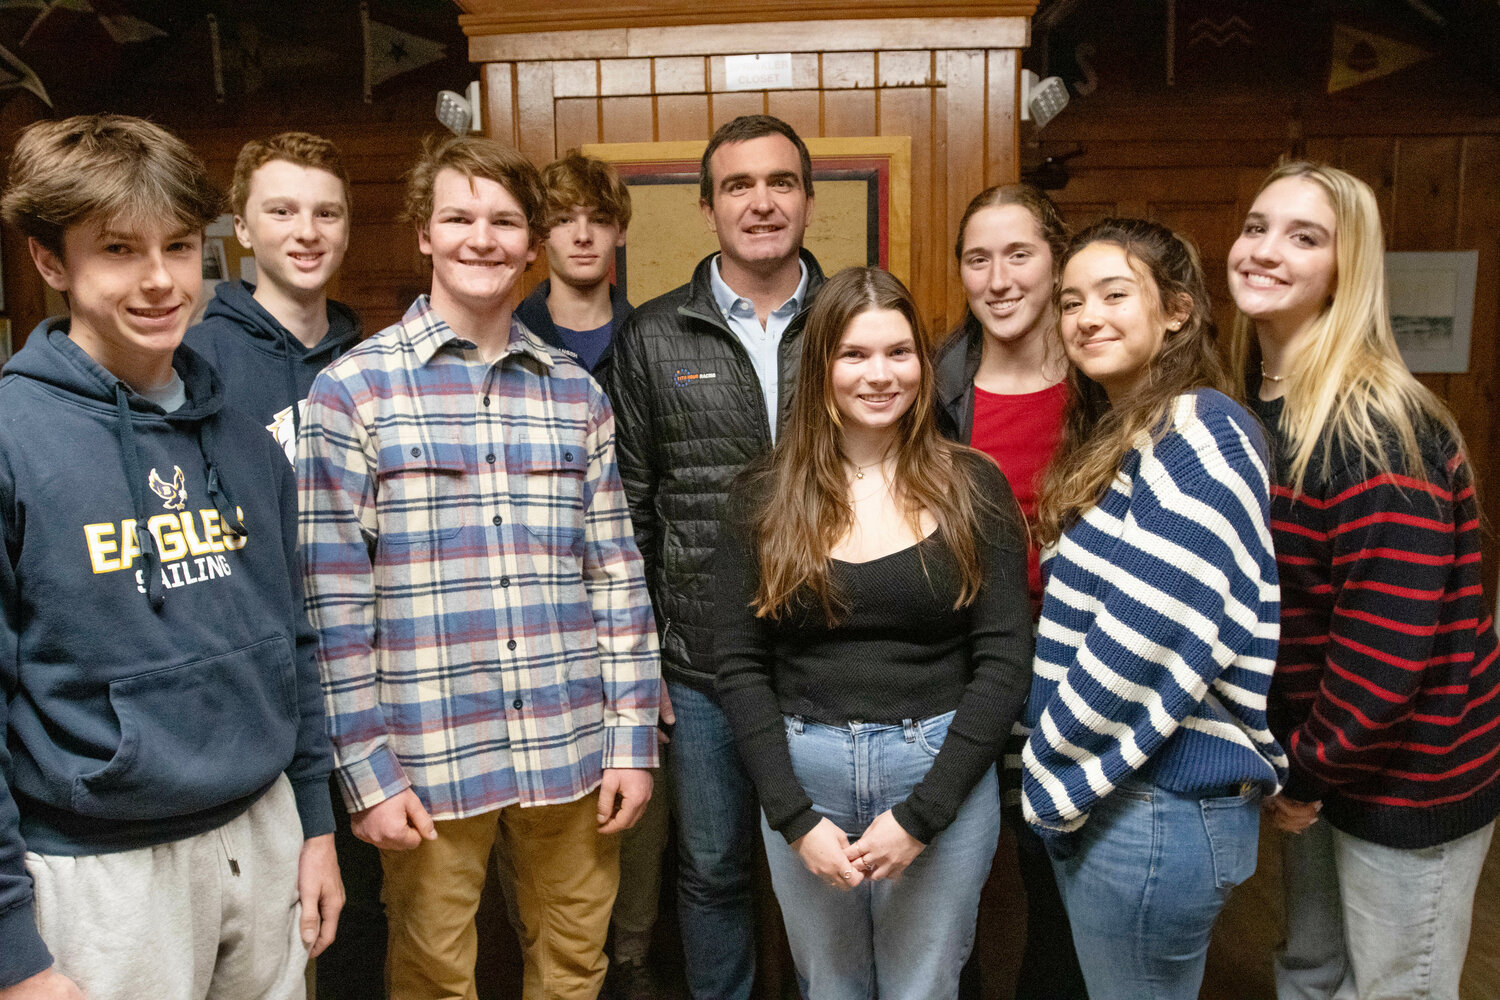 Members of the BHS sailing team pose for a photo with skipper Charlie Enright during a special event on Wednesday night, Nov. 29. Pictured are (from left to right) Duffy Macaulay, Jack Gaynor, Christopher Chwalk, Quin Schneider, Charlie Enright, Avery Guck, Abby Appleyard, Abby Guertler and Lauren Leonard.